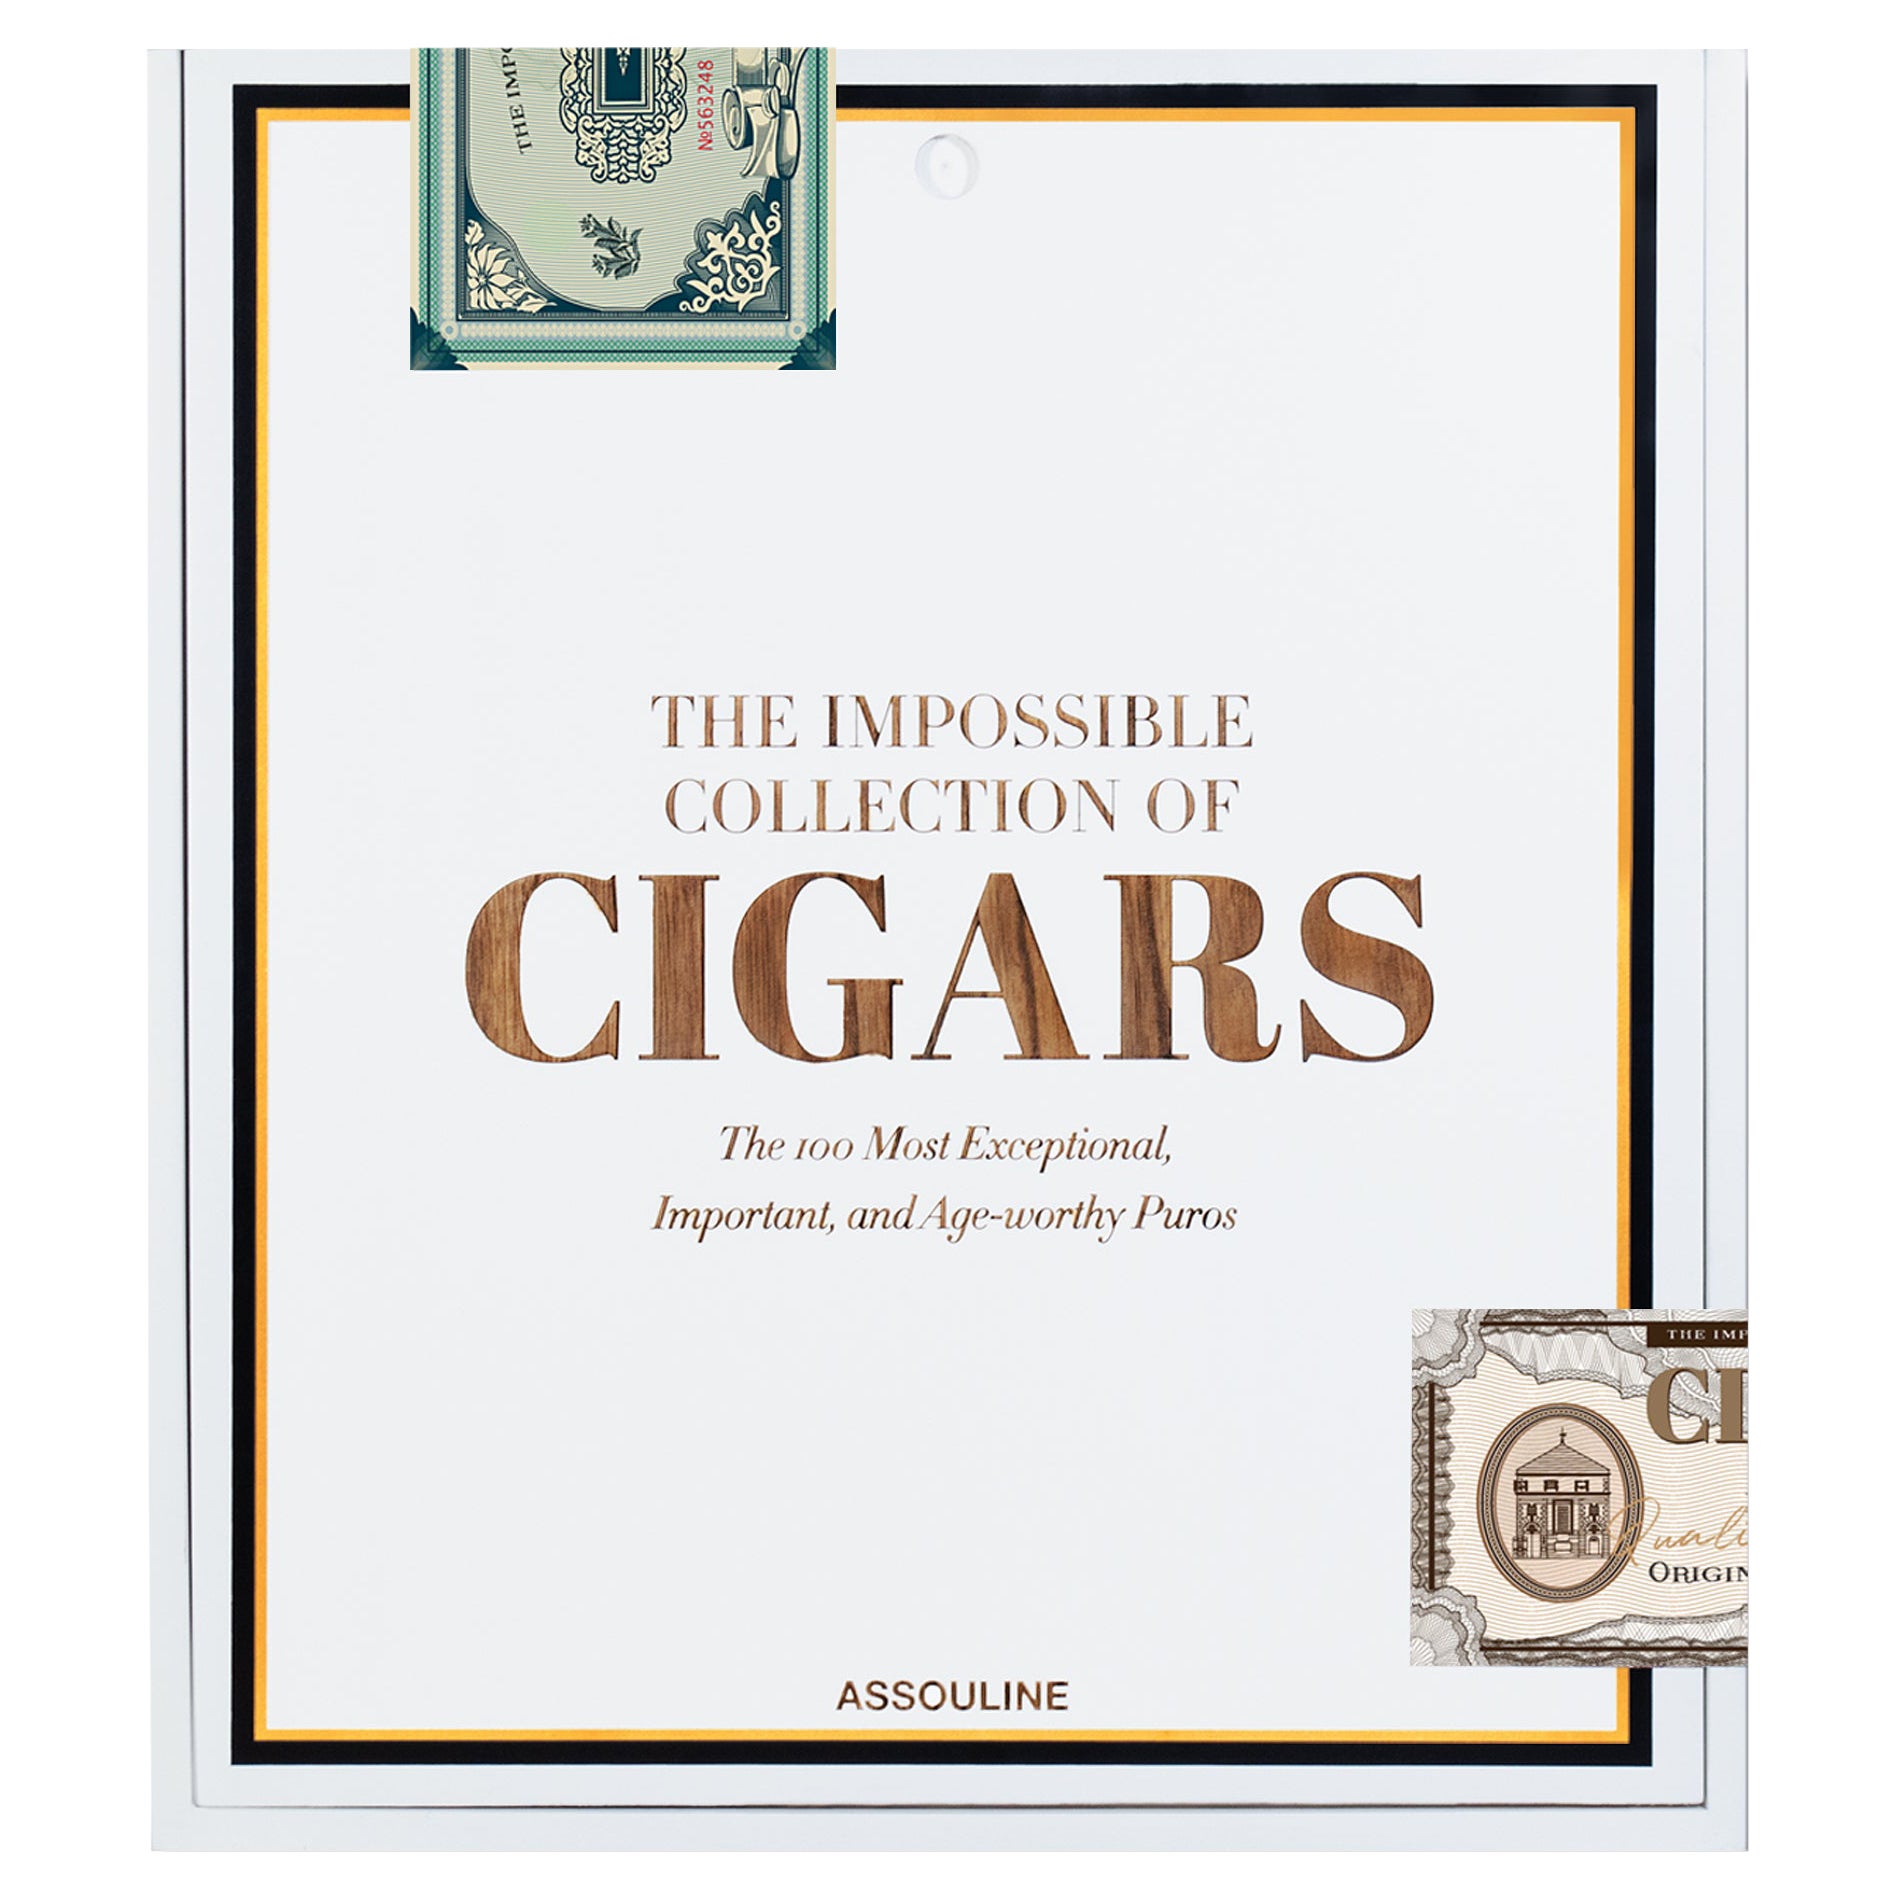 The Impossible Collection of Cigars is a bid for readers to journey to the fabled Cuban tobacco farms, get up close and personal with the torcedores (master cigar rollers) as they discover the world’s most commendable and coveted cigars. Considering